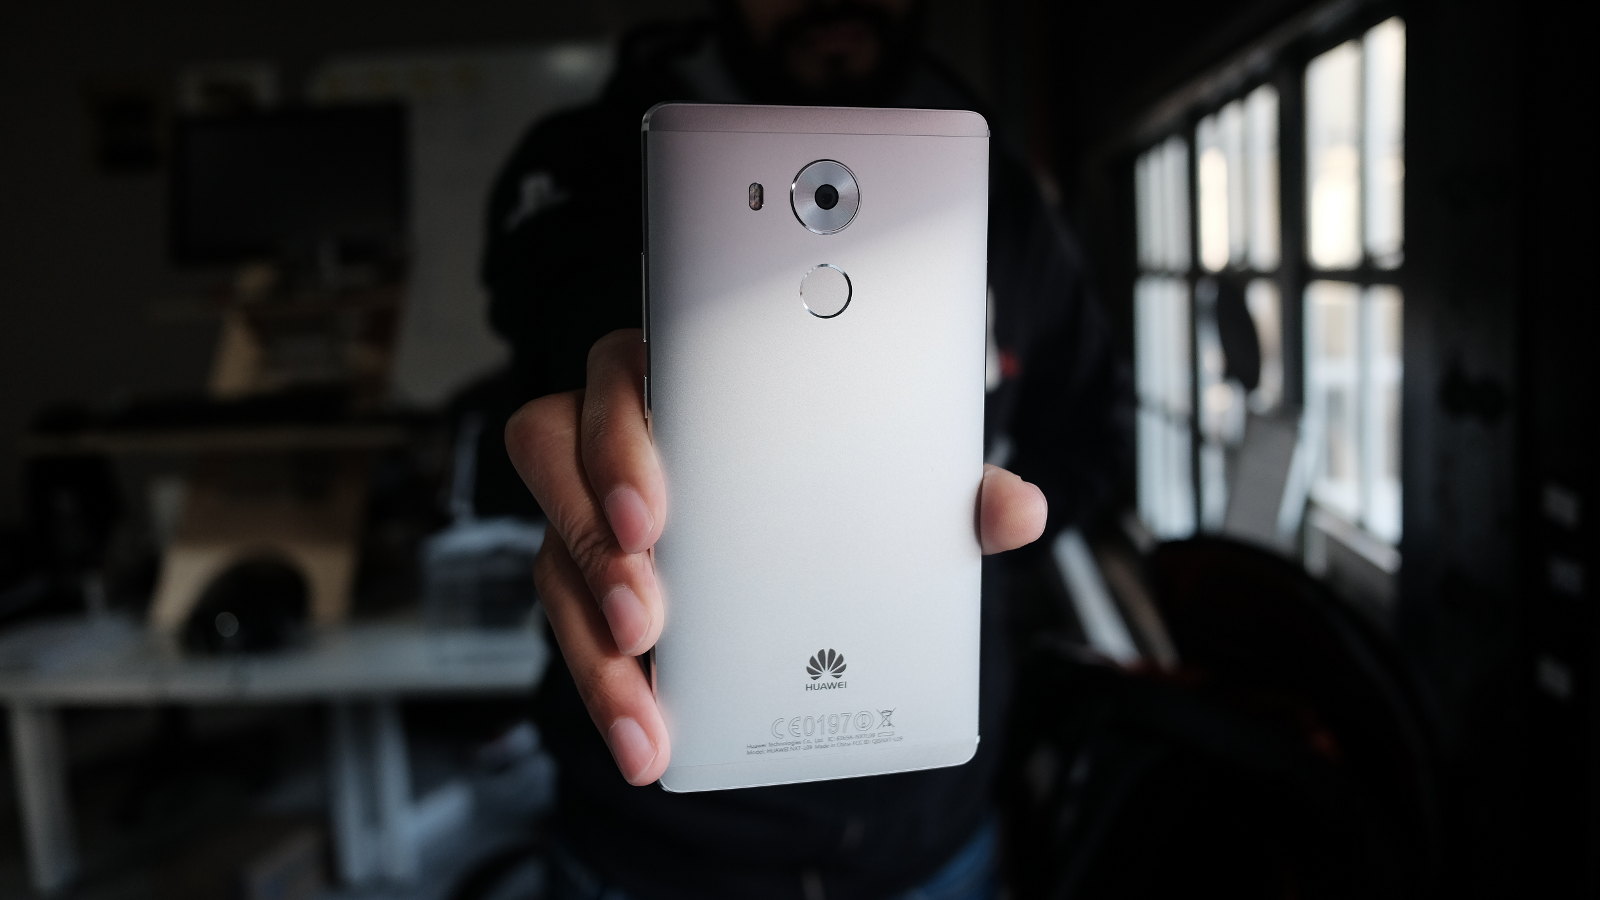 huawei mate 8 back featured